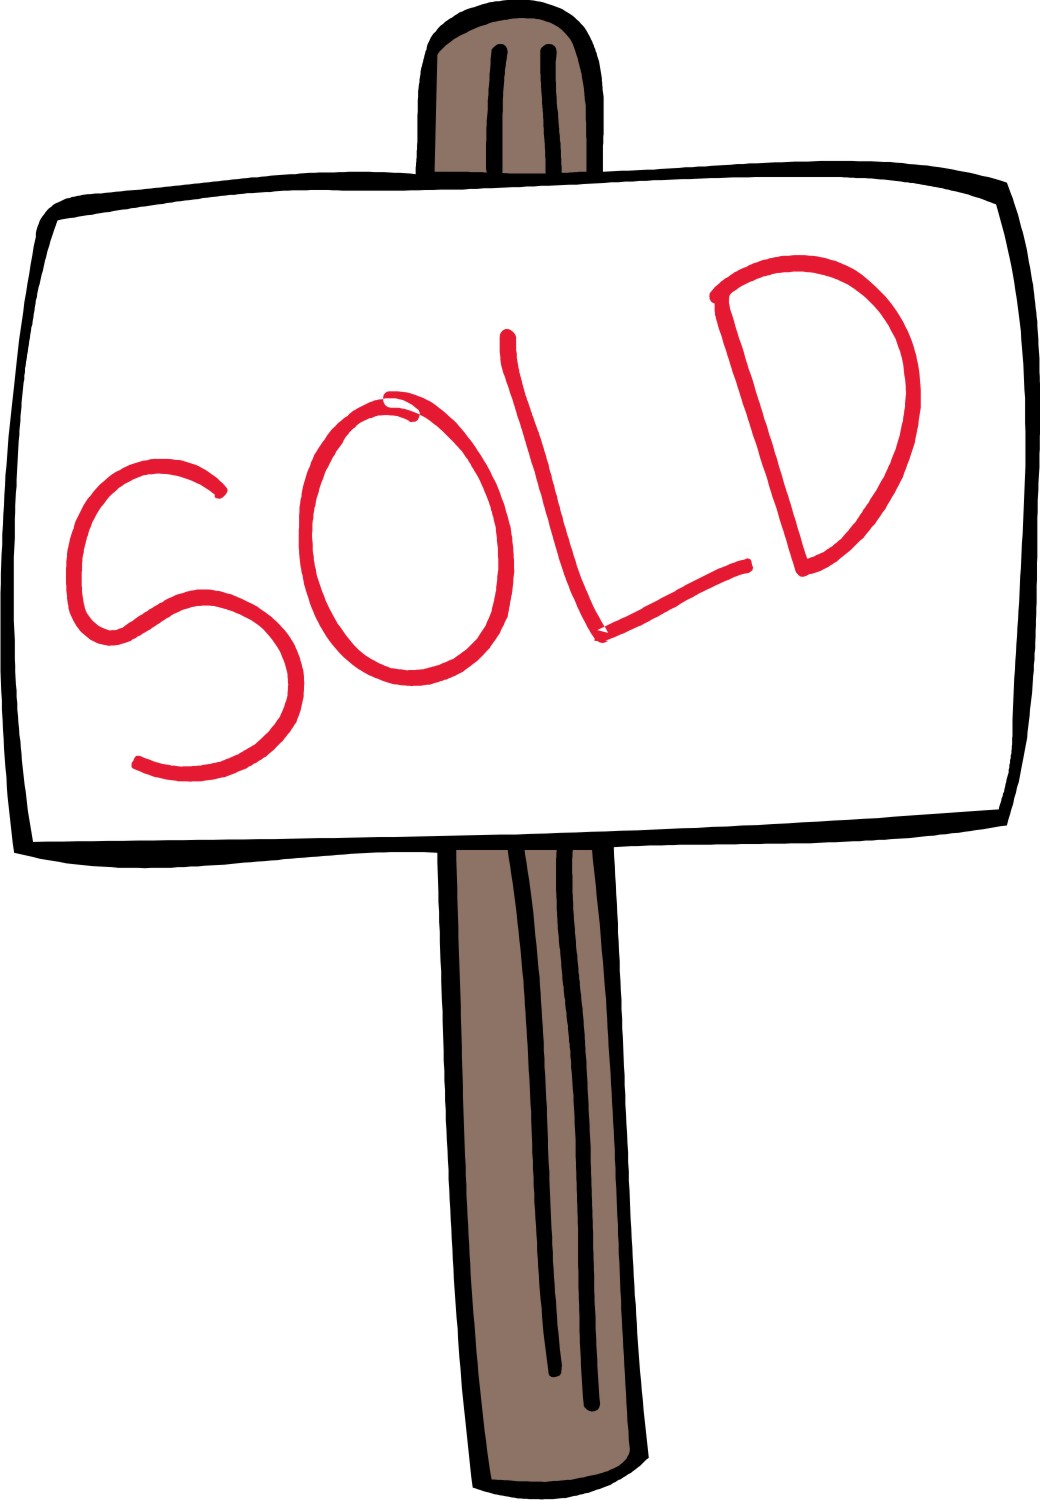 Real Estate Sold Clipart